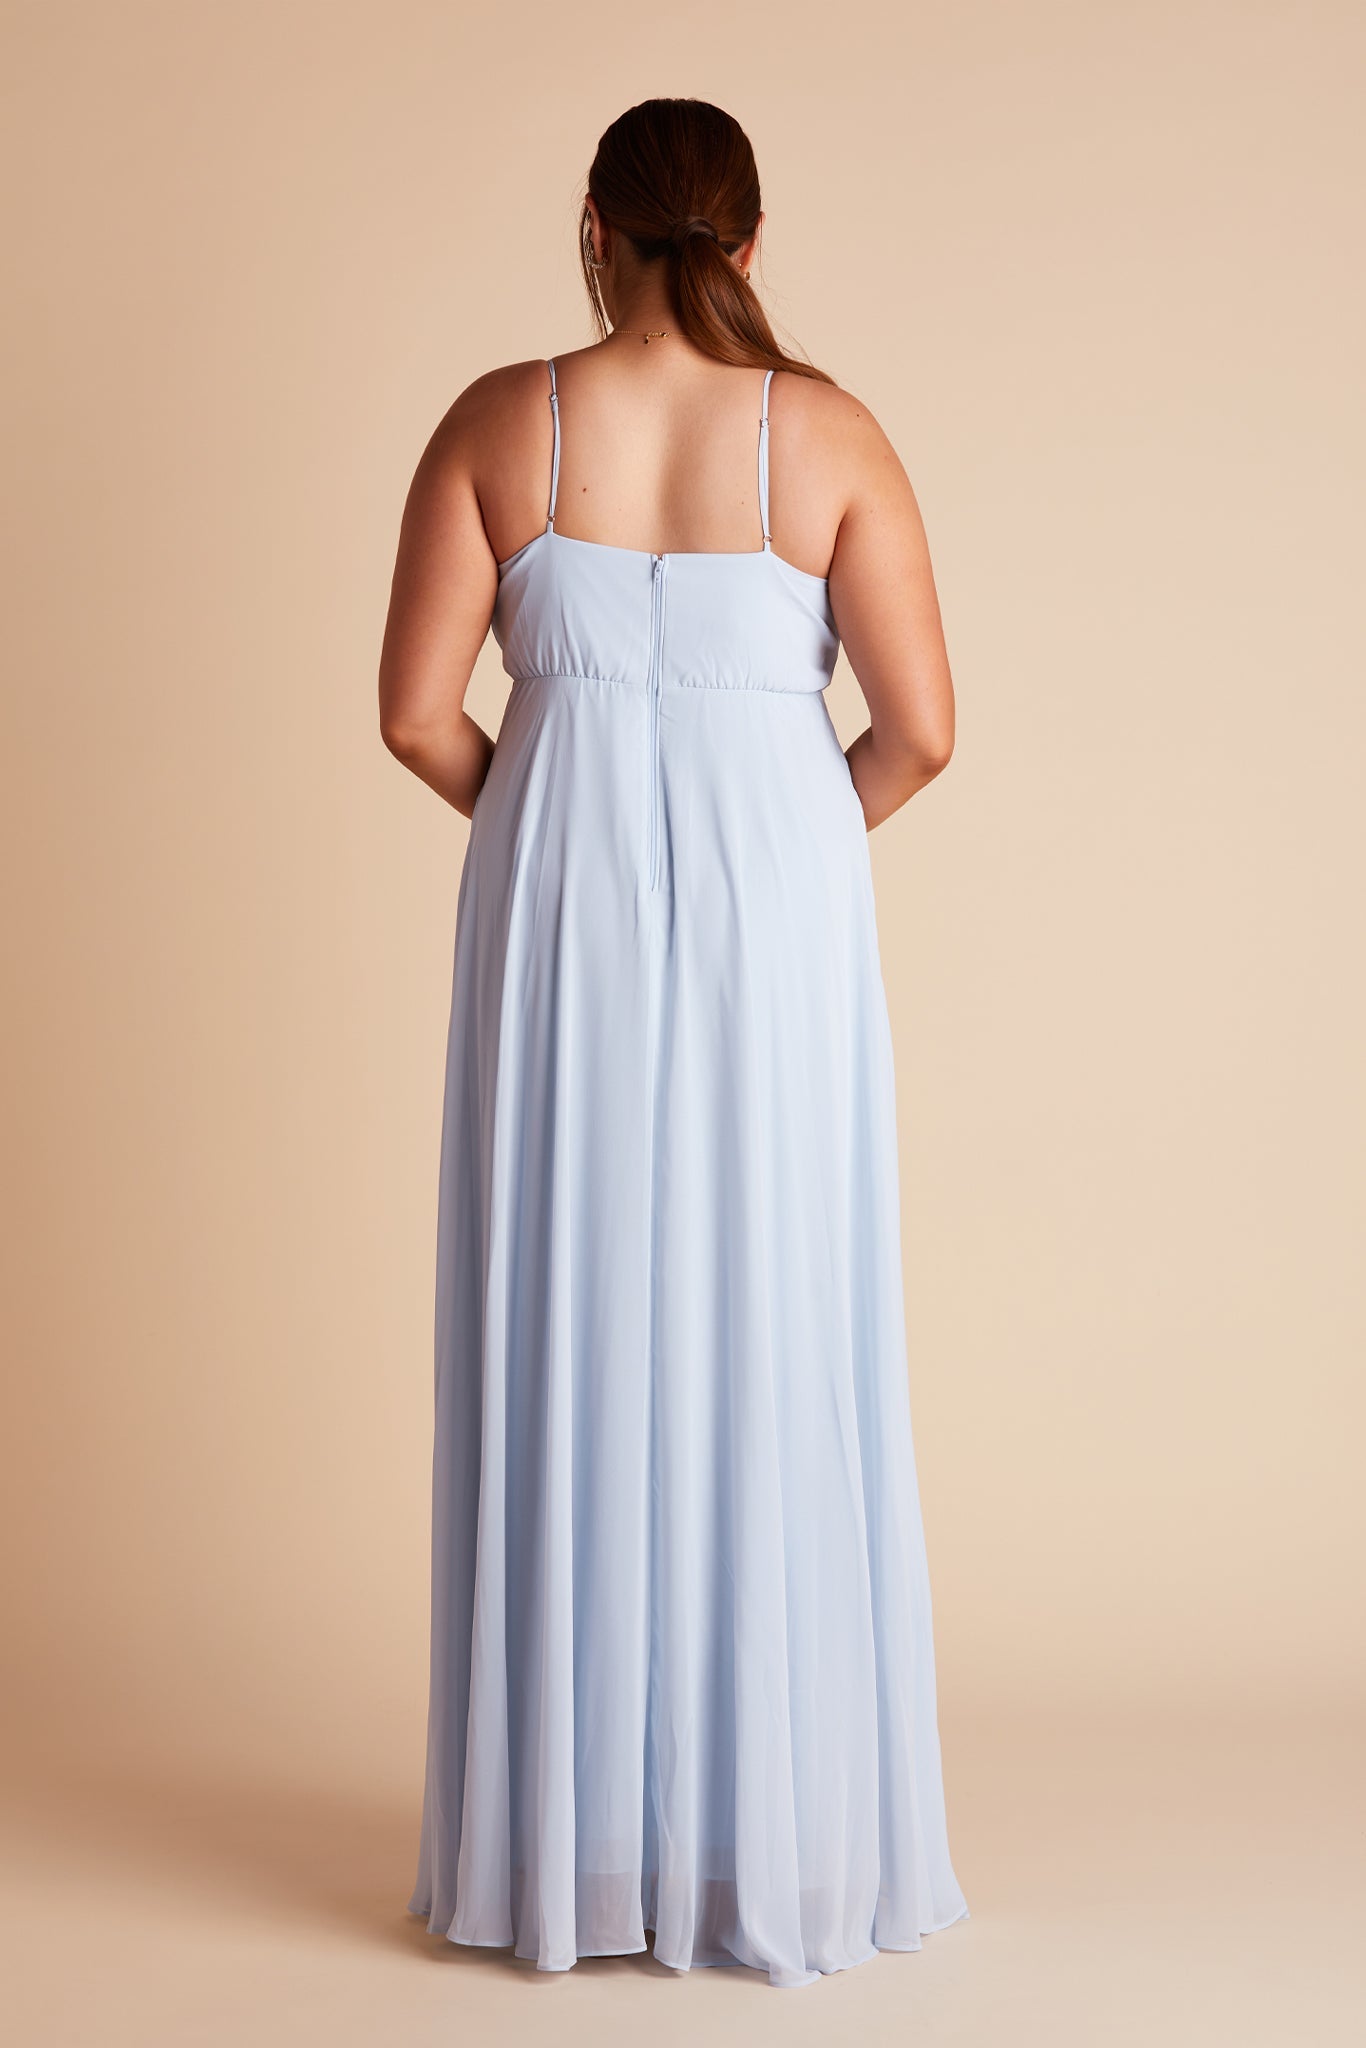 Kaia plus size bridesmaids dress in ice blue chiffon by Birdy Grey, back view